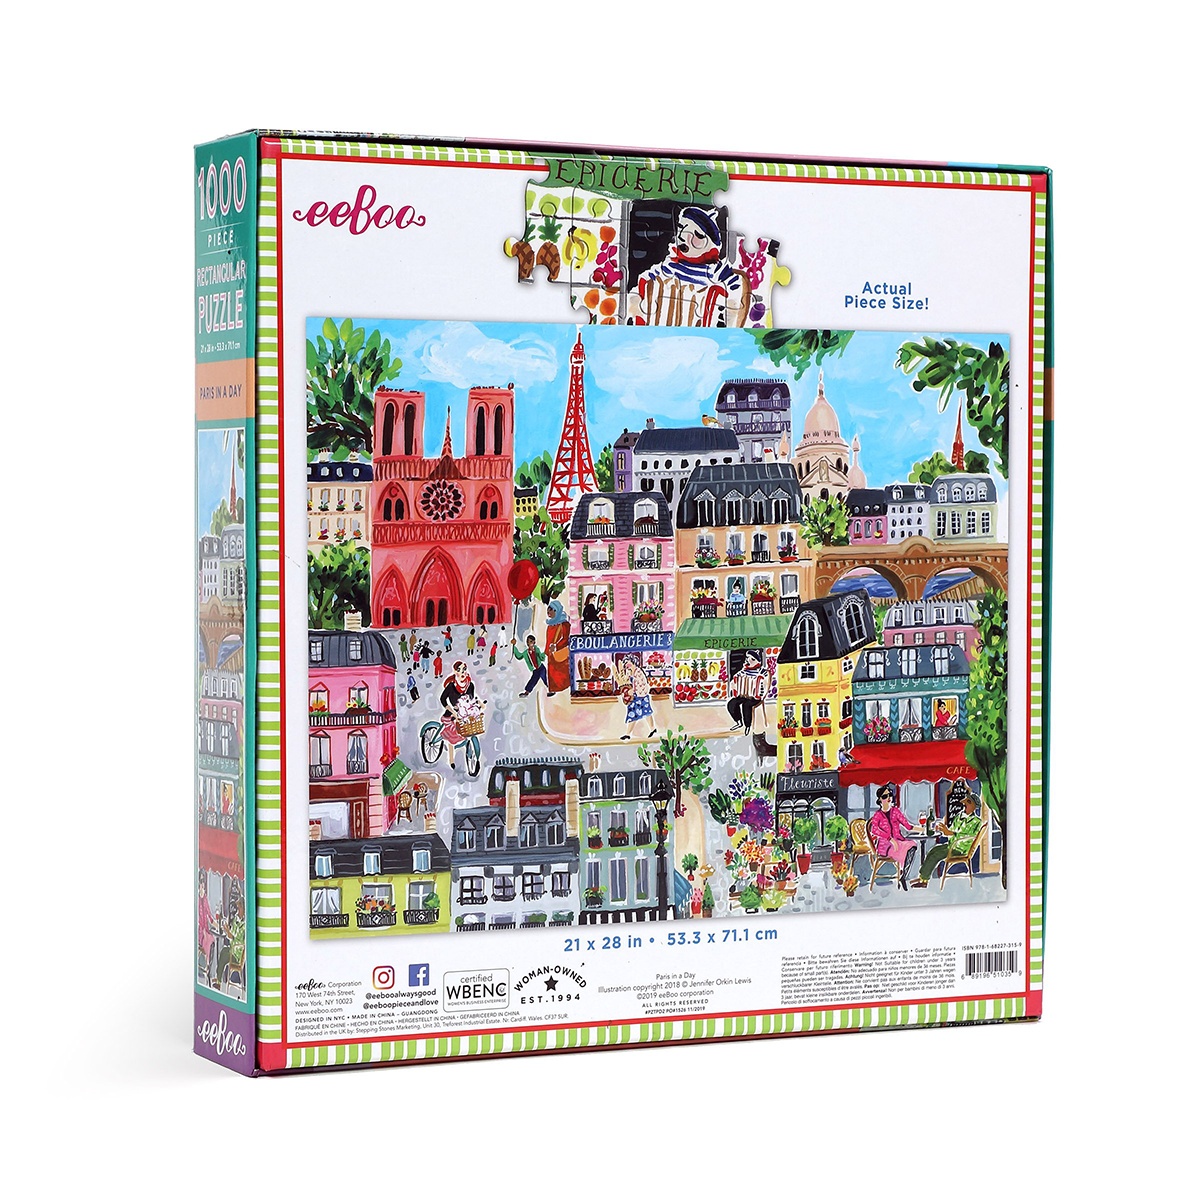 Back of box of Paris in a Day Puzzle